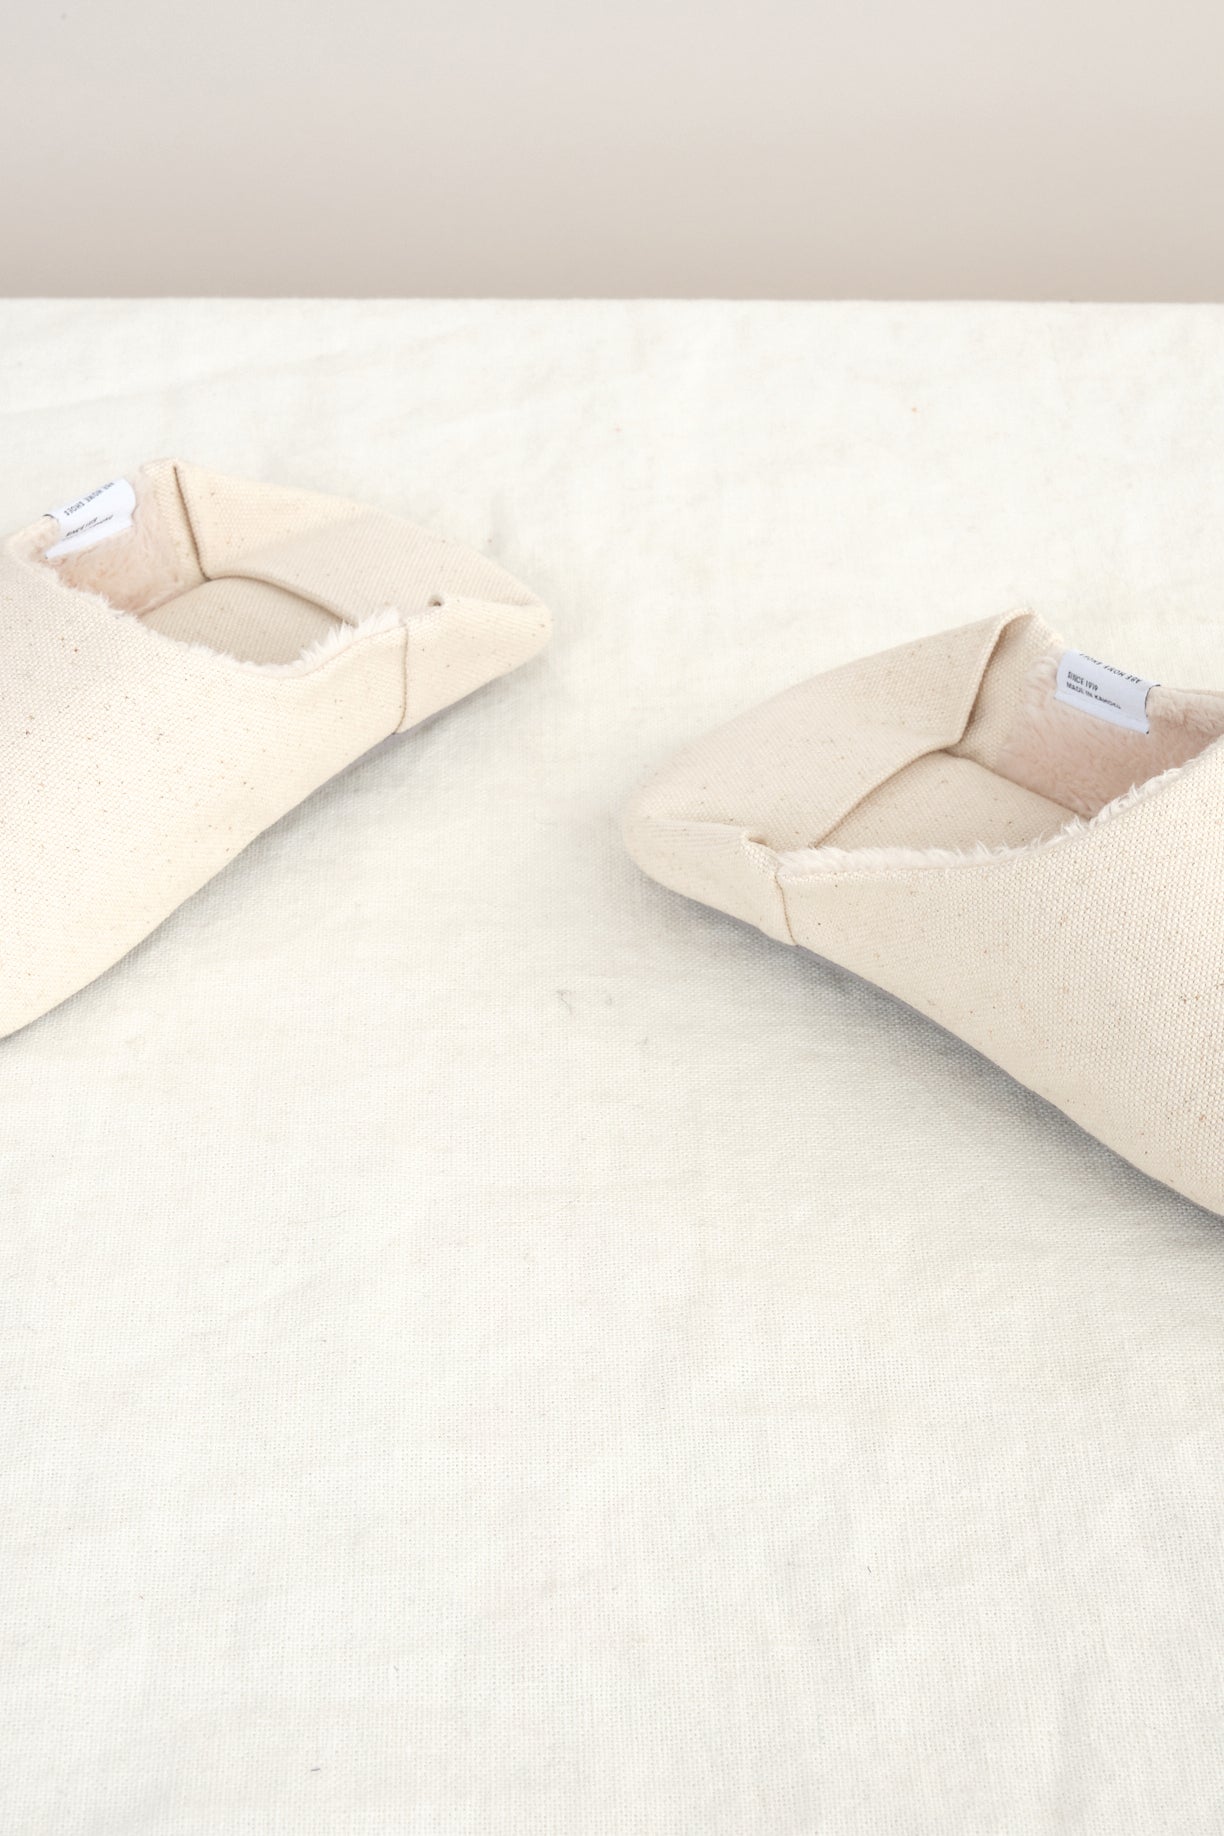 Moku Linen Room Shoes in Natural